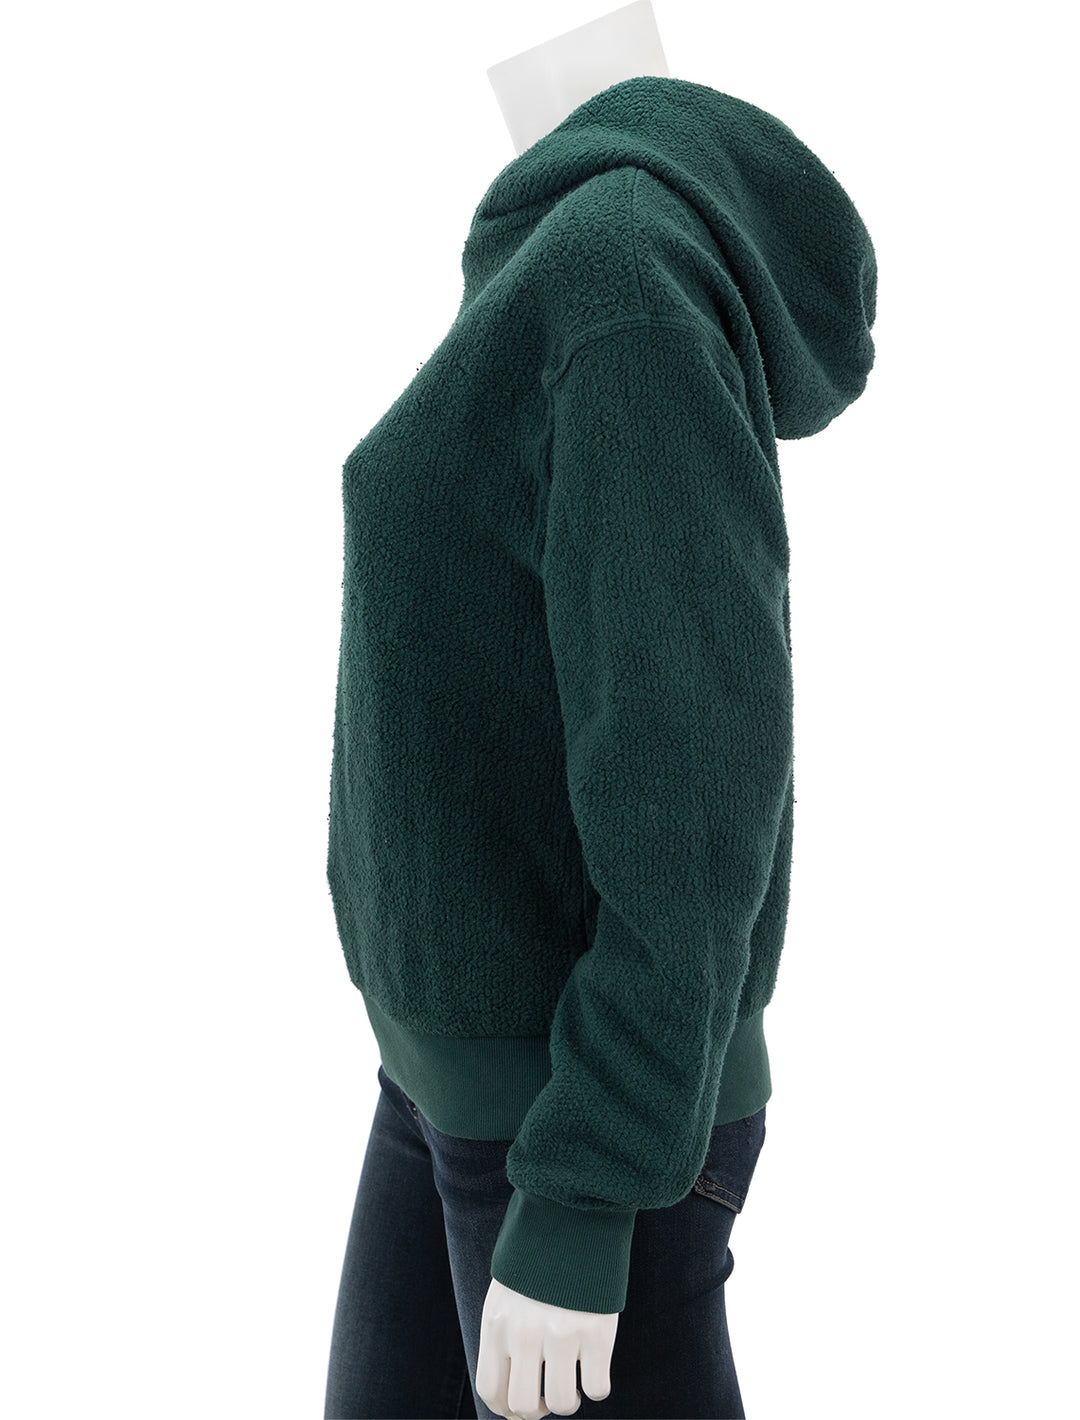 Side view of Perfectwhitetee's reese hoodie in pine.